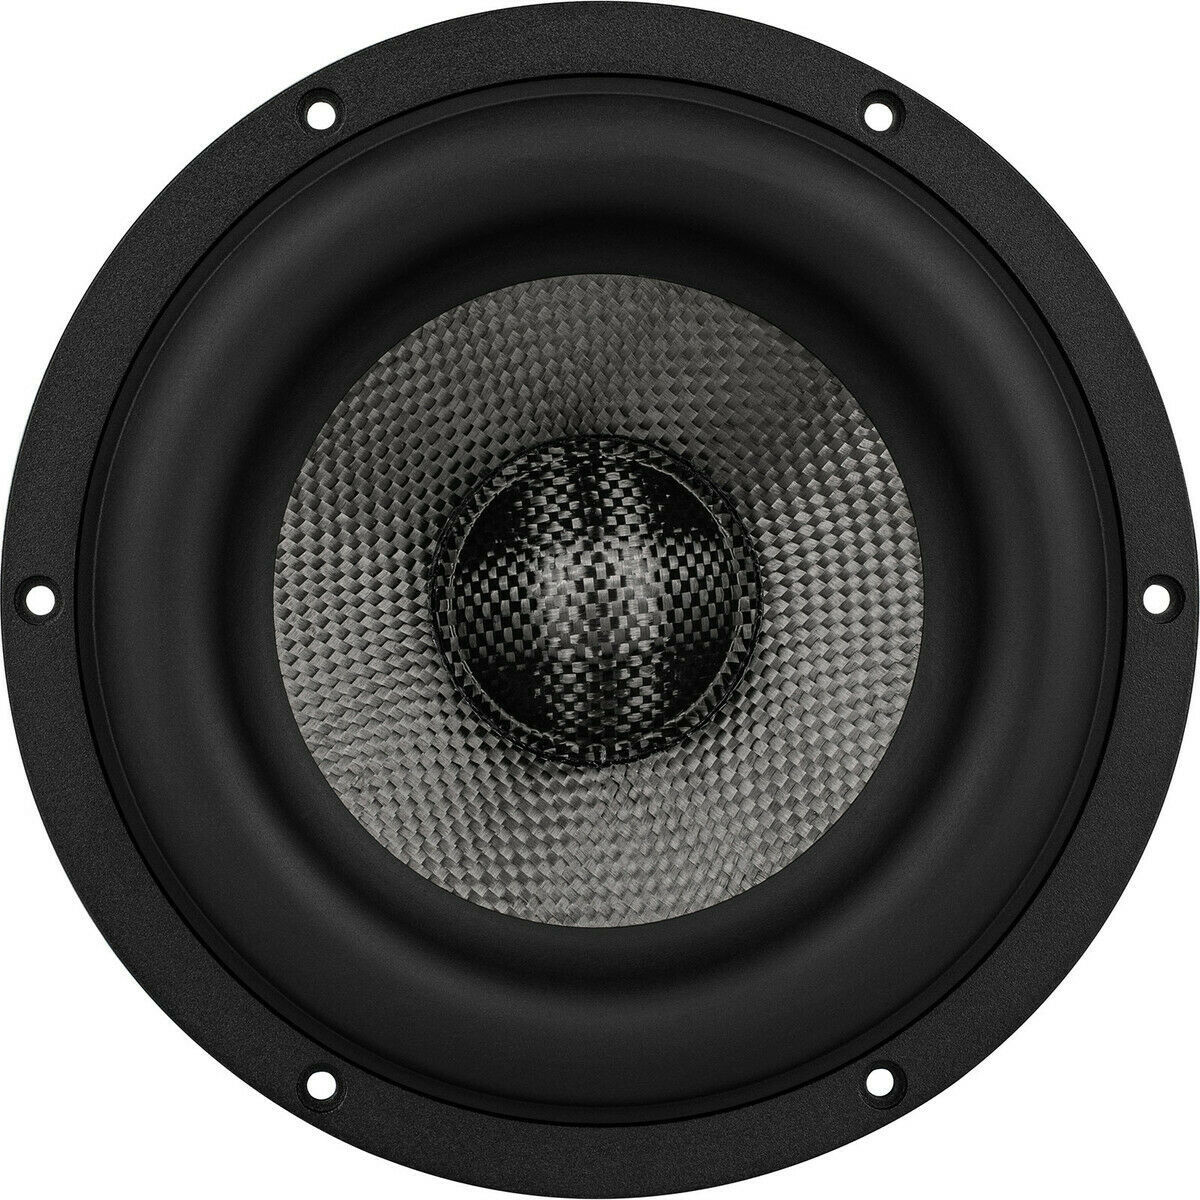 Primary image for Epique - E180HE-44 - 7" DVC MMAG Extended Range Subwoofer - 4 Ohm per Coil